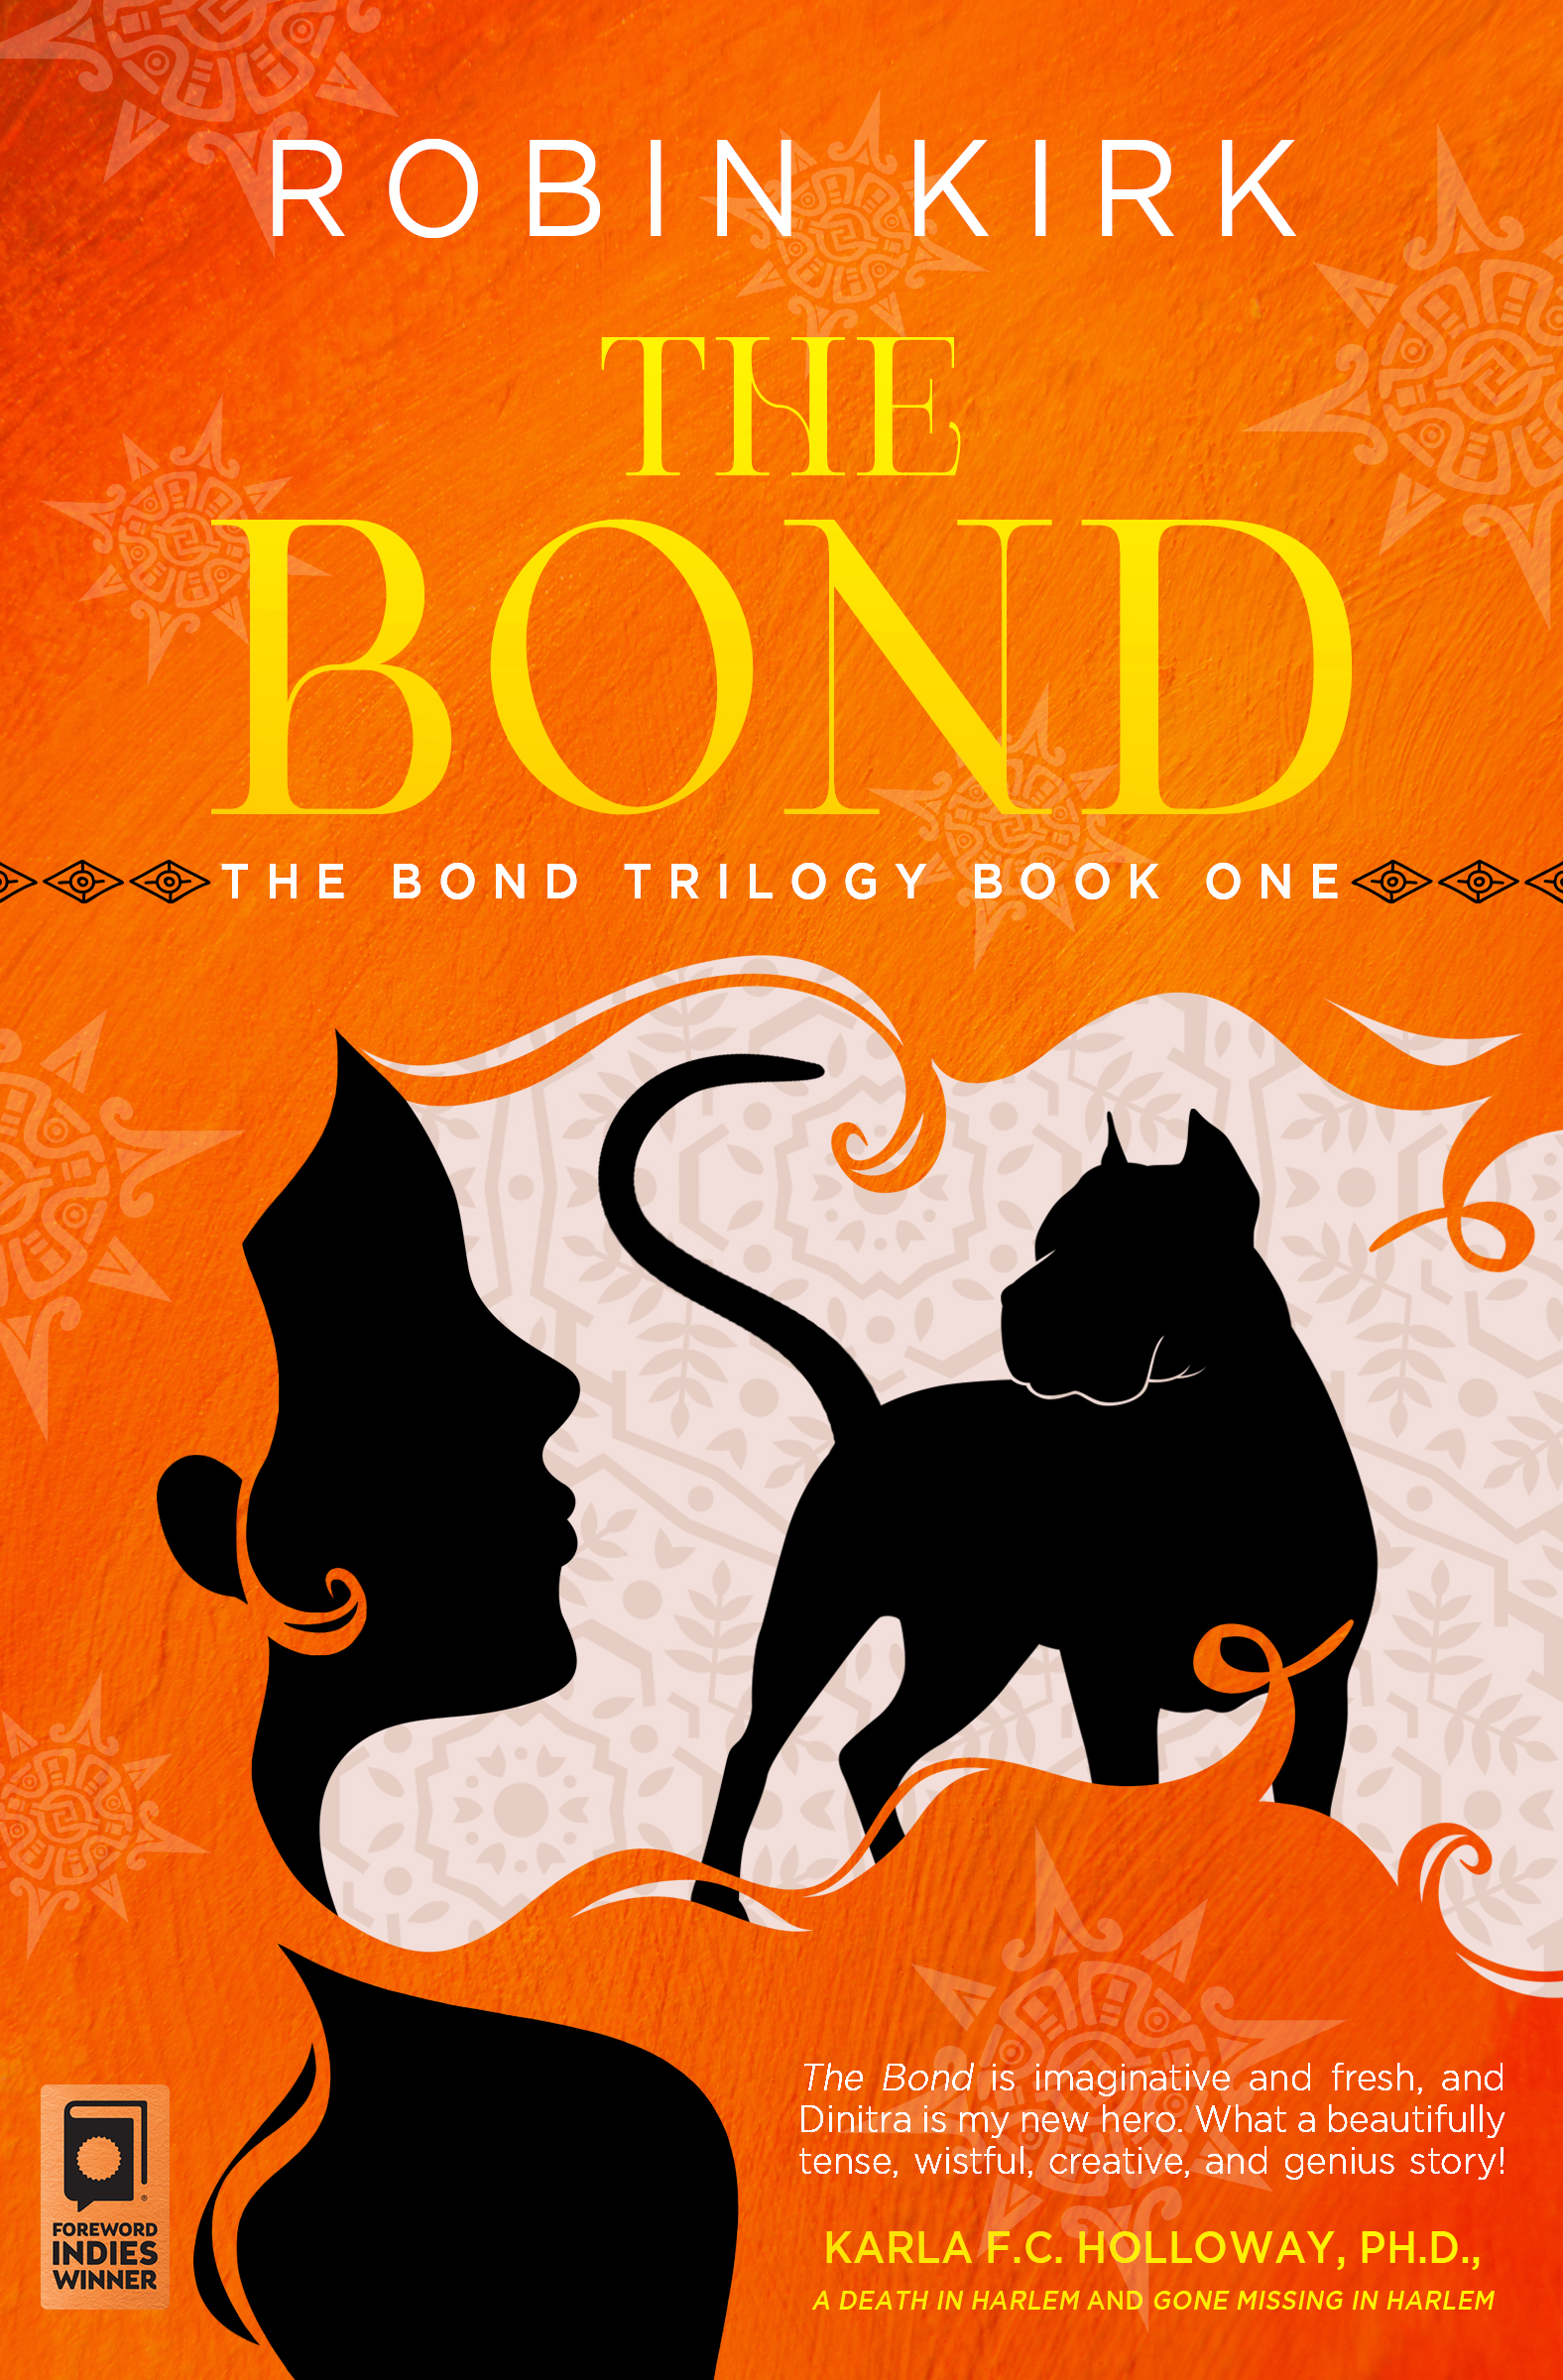 A bright orange book cover with the black silhouette of a female and a large dog